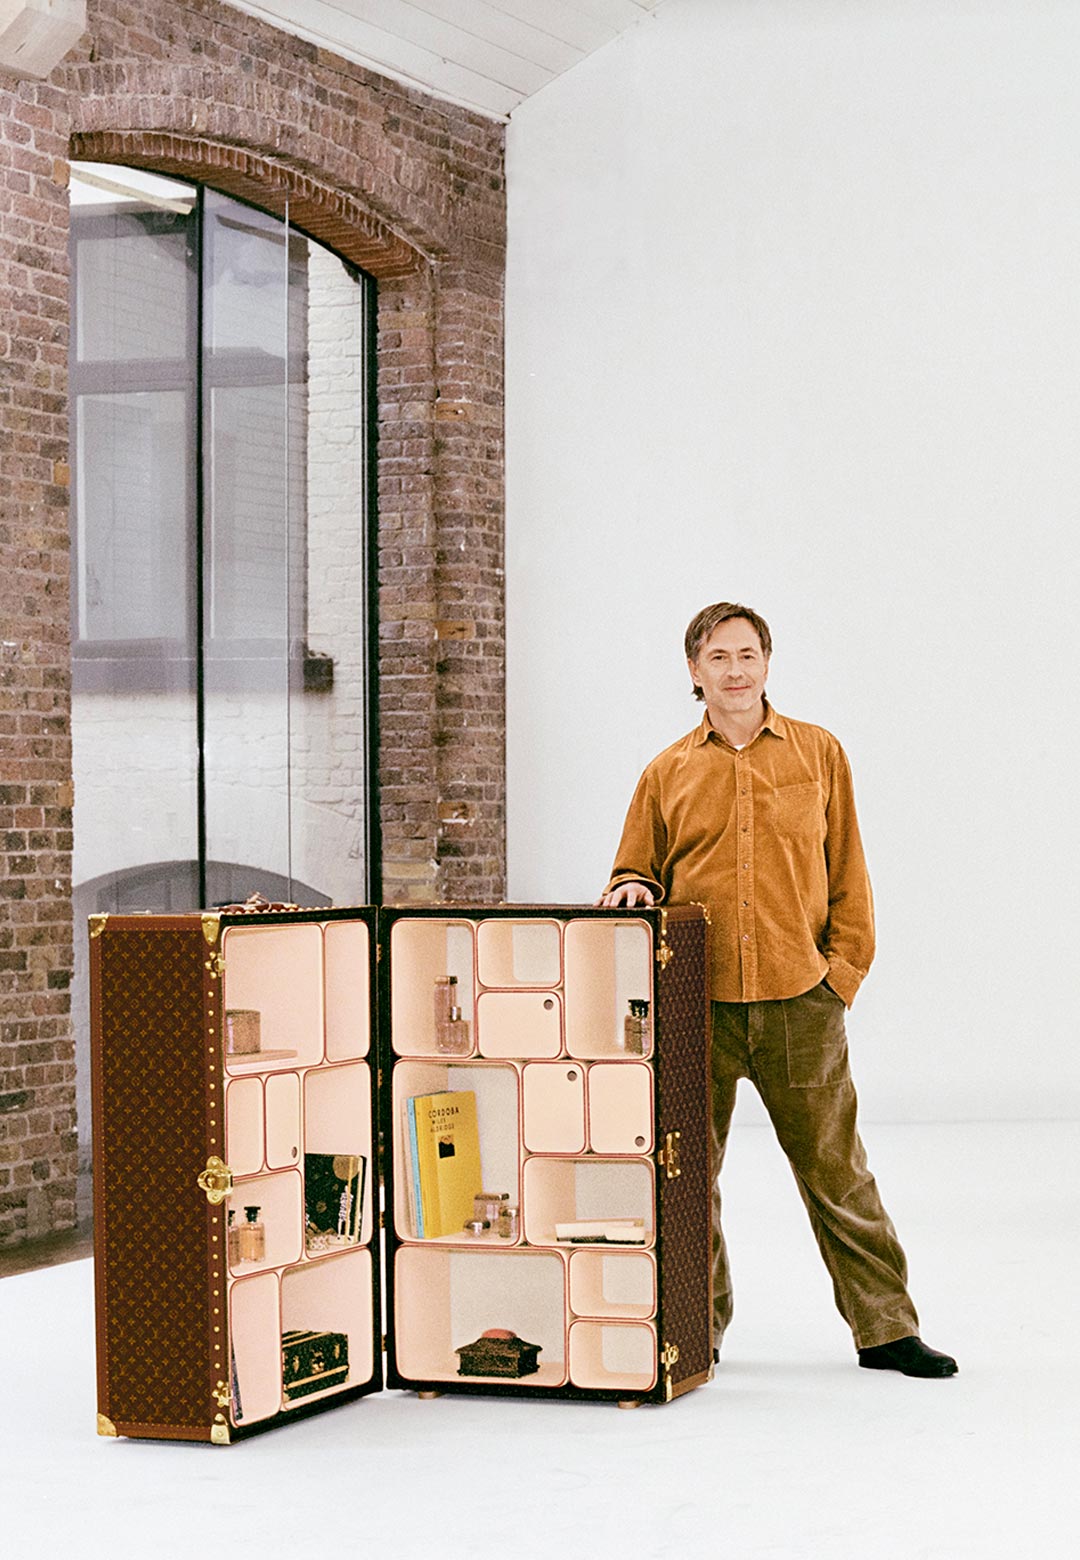 Marc Newson reimagines the Louis Vuitton trunk as a 'Cabinet of